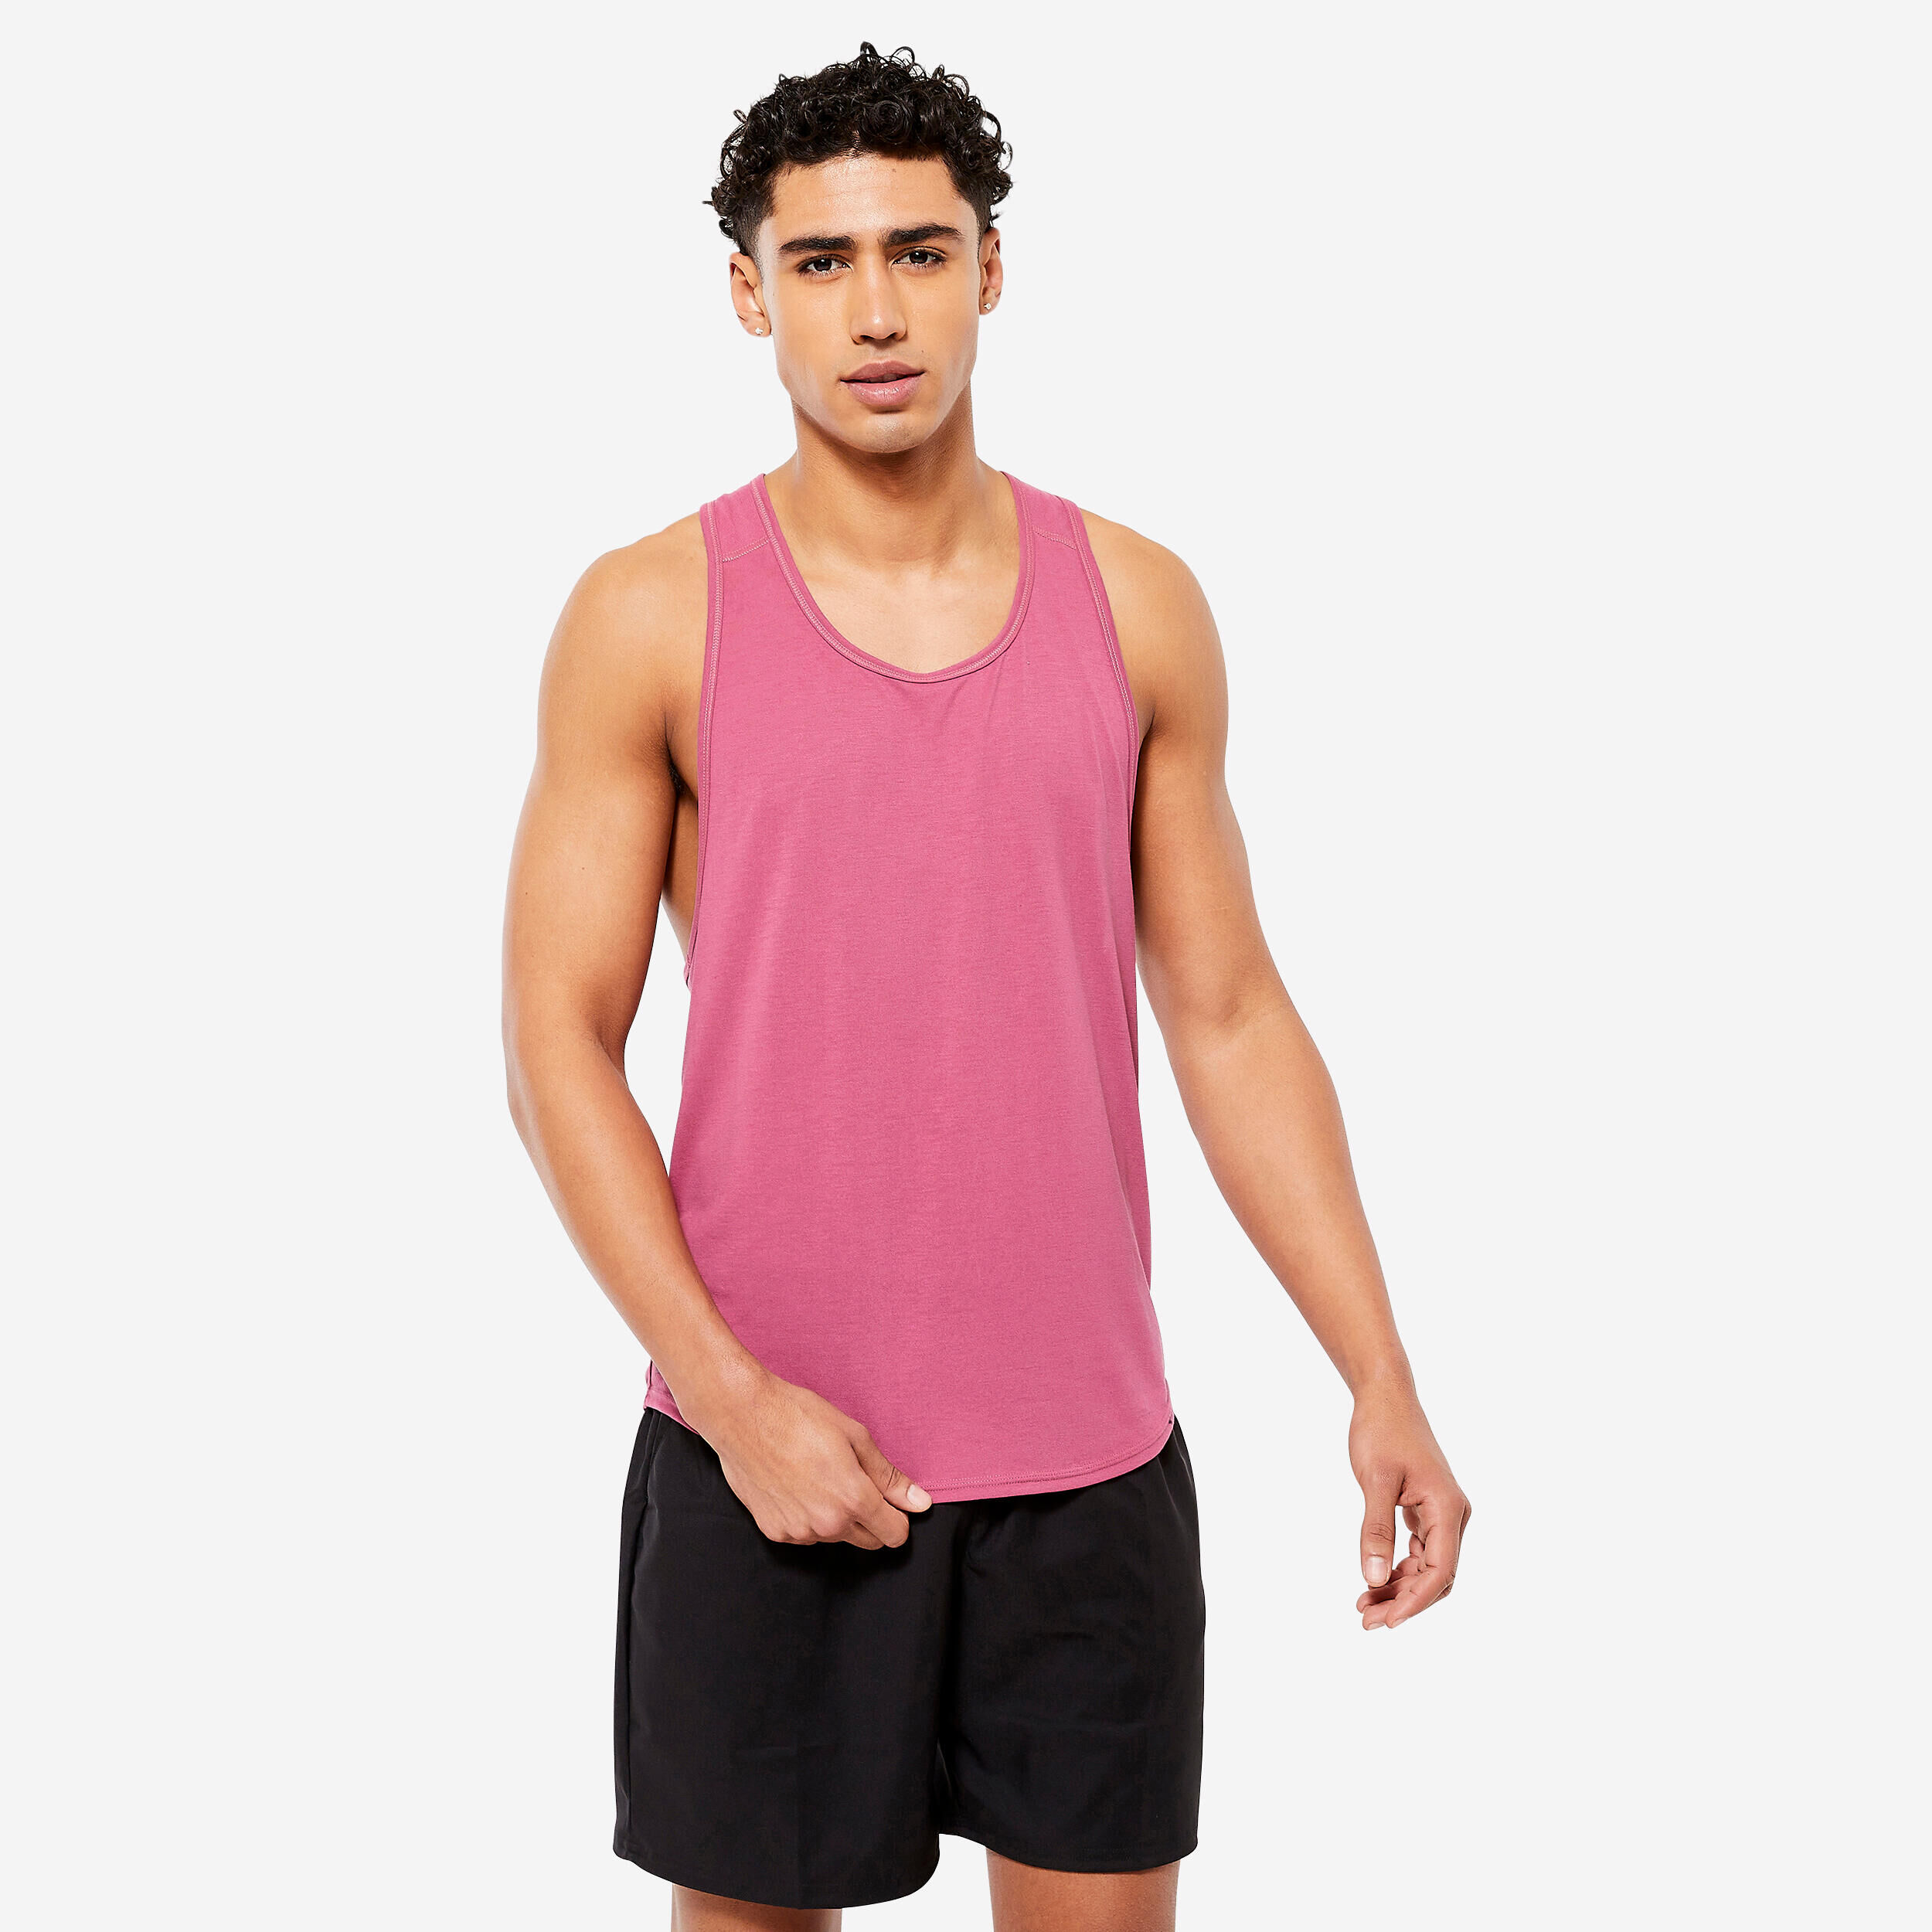 DOMYOS Men's Breathable Weight Training Performance Stringer Tank Top - Pink